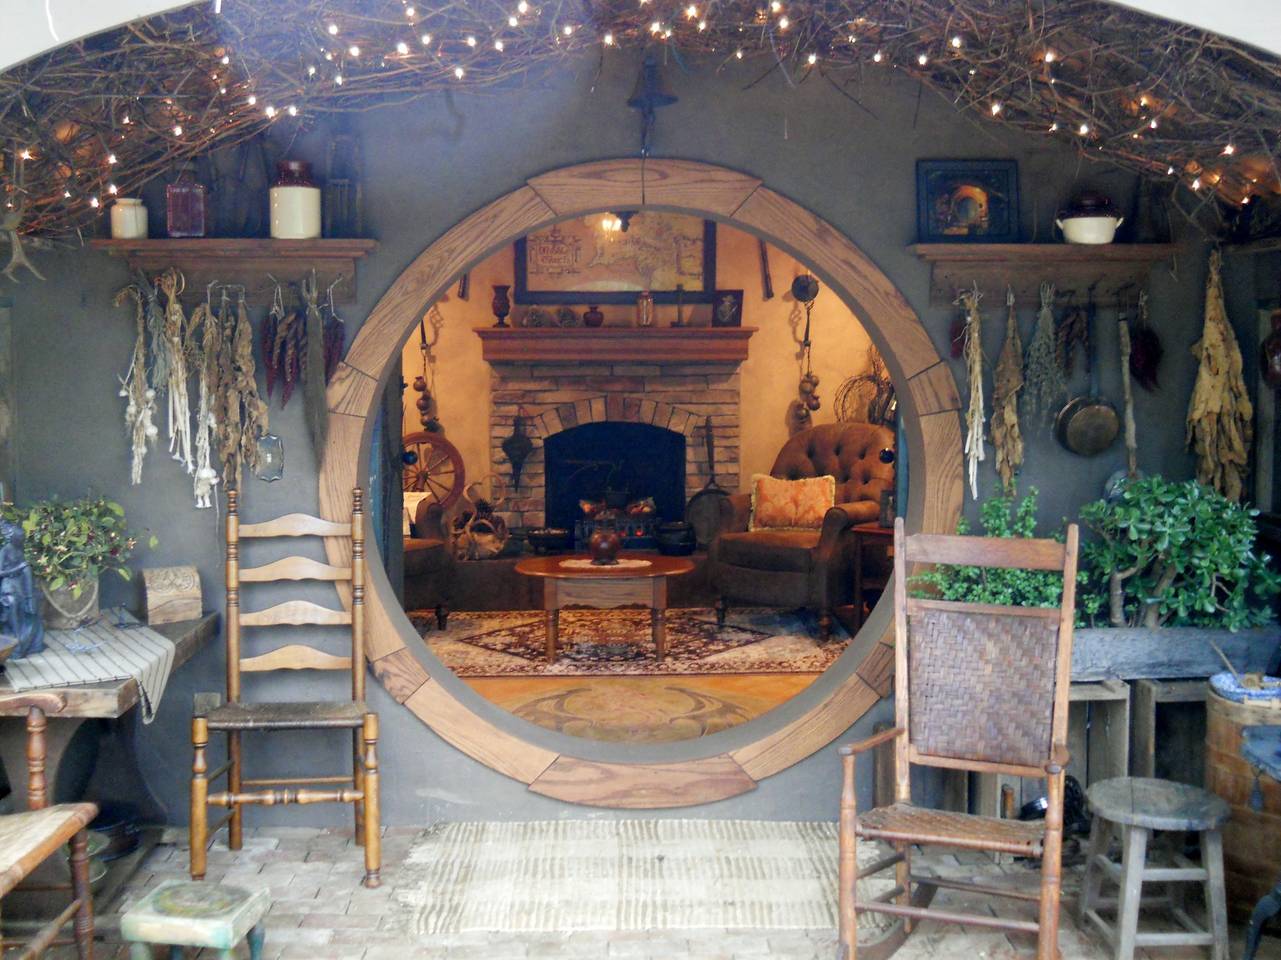 Live Like a Hobbit in This Virginia Airbnb Fit for Frodo Baggins